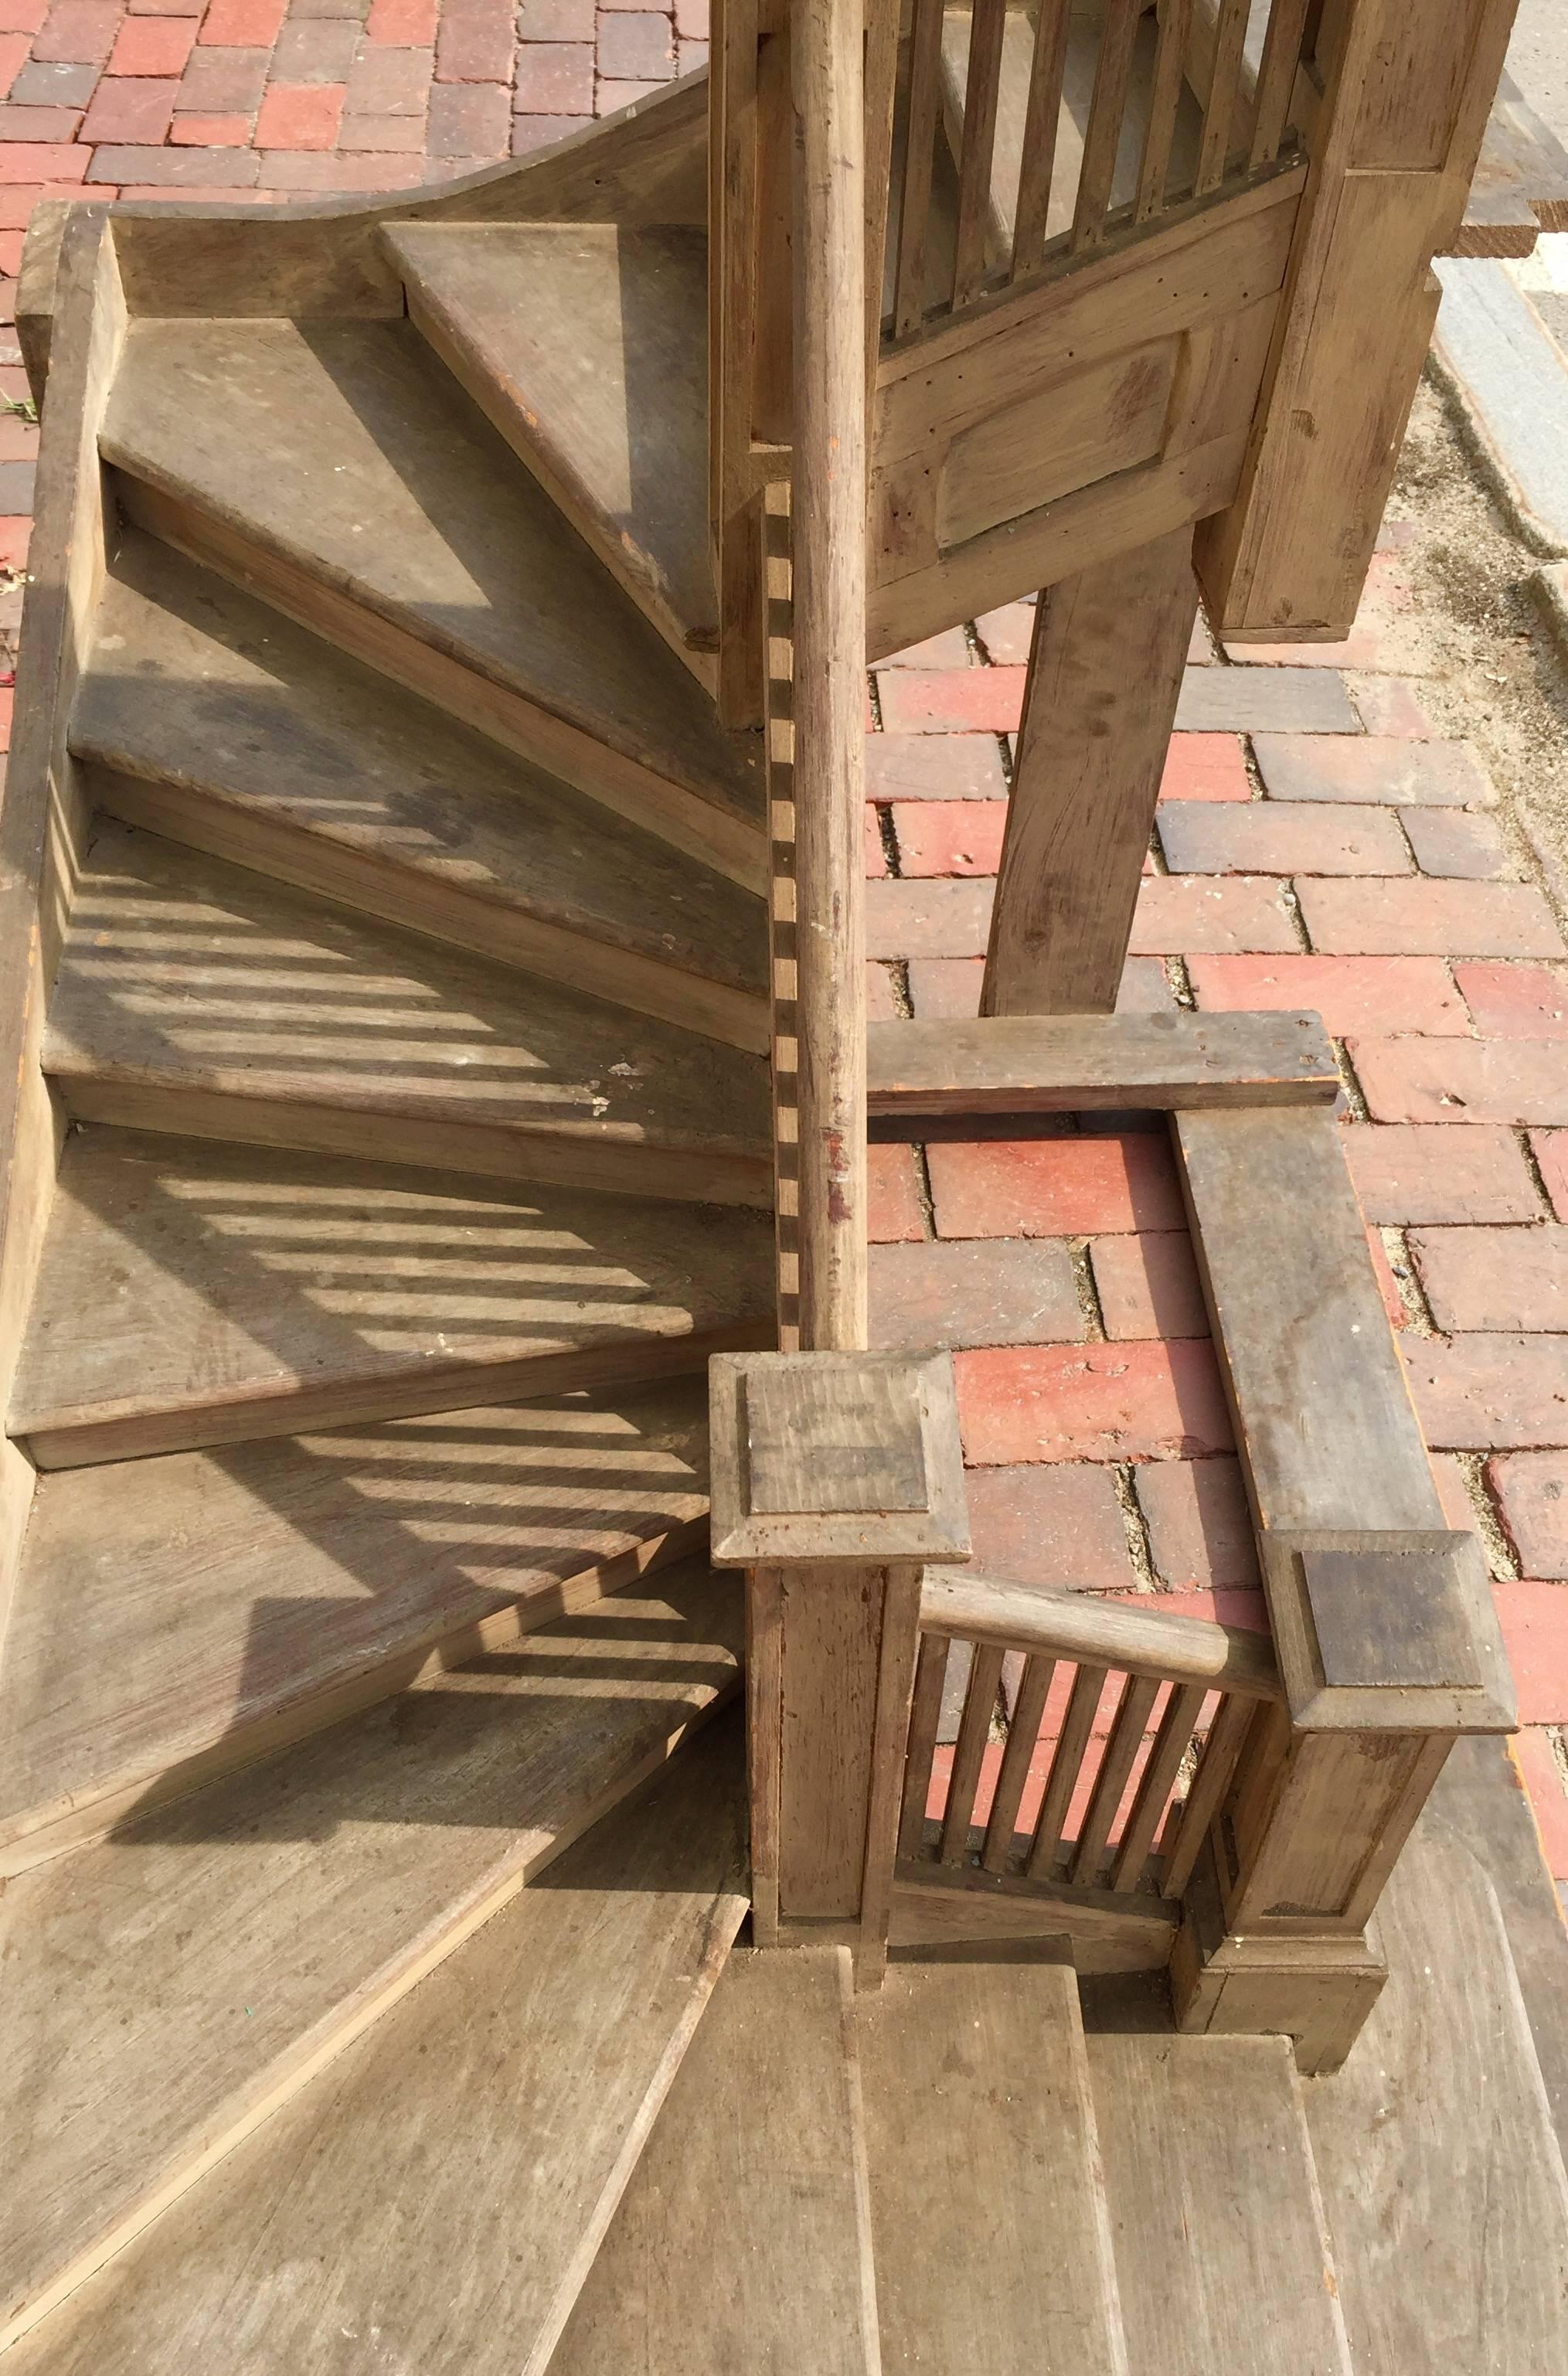 American Monumental 19th Century Carpenters Staircase Model in Old Paint